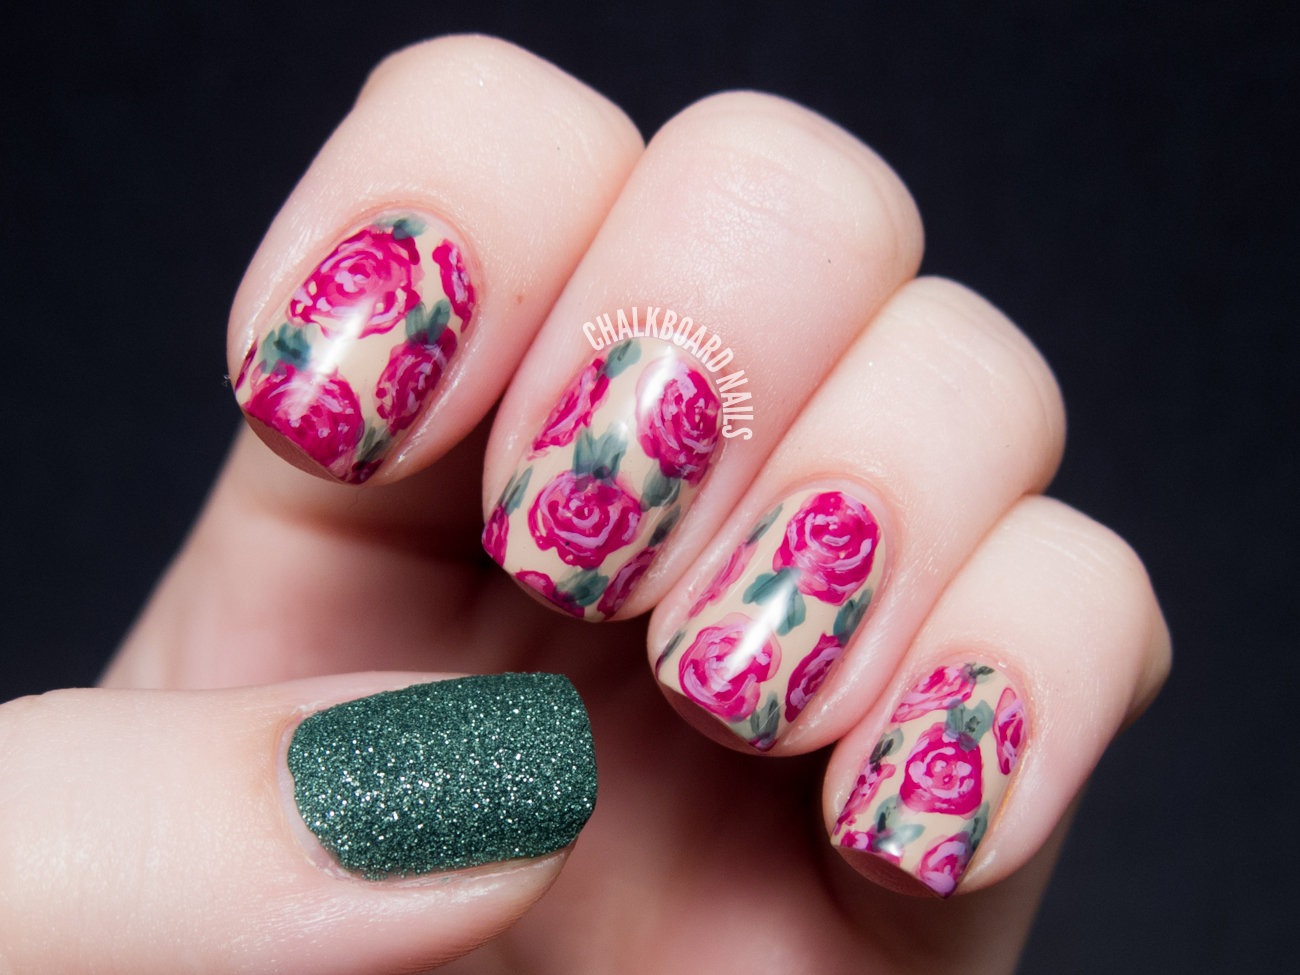 7. Bold and Colorful Rose Nail Art - wide 9